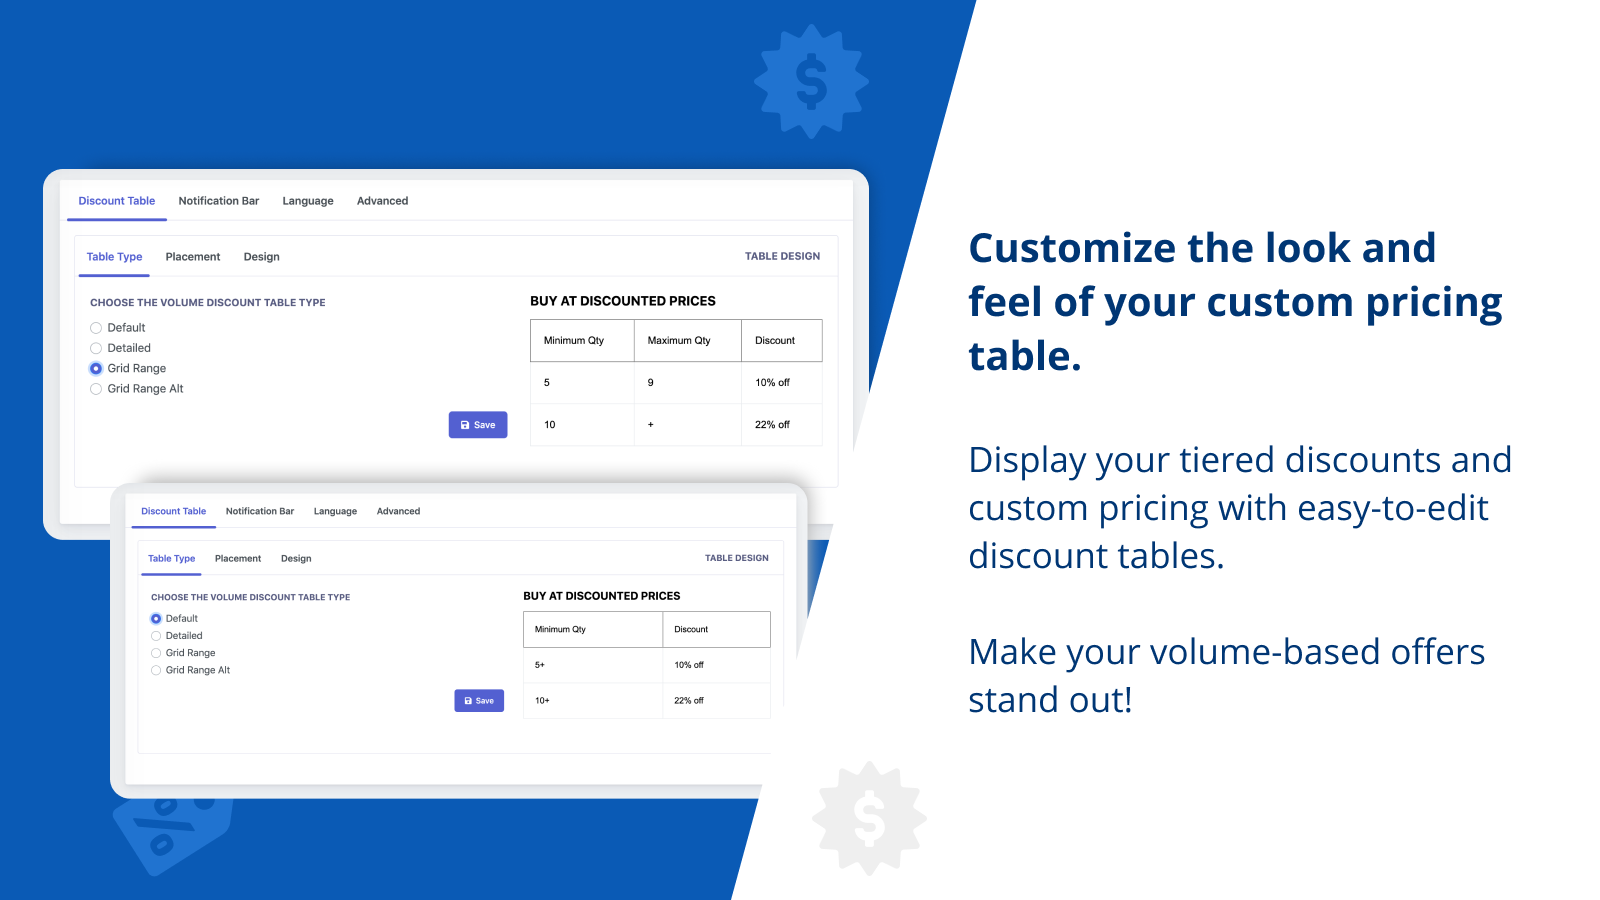 Customize the look and feel of your custom pricing table 